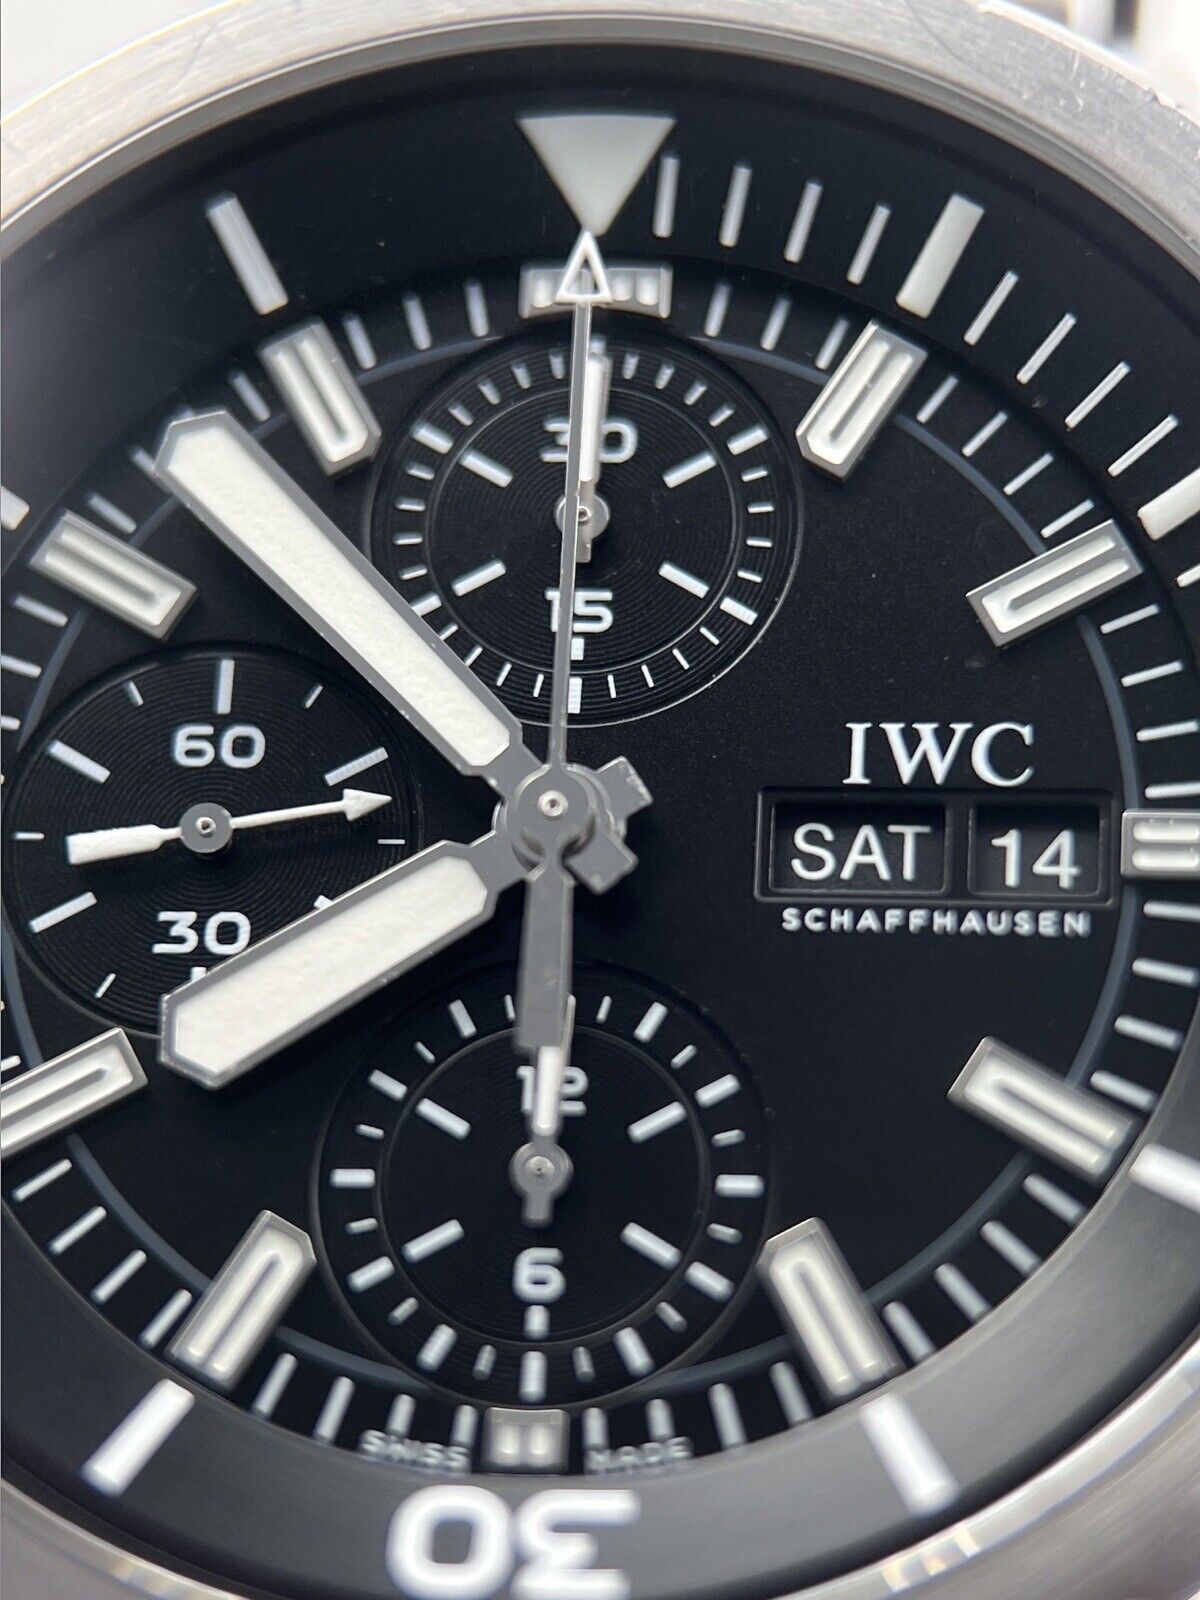 IWC Aquatimer Stainless Steel Chronograph IW376803 Men’s Automatic Watch B&P